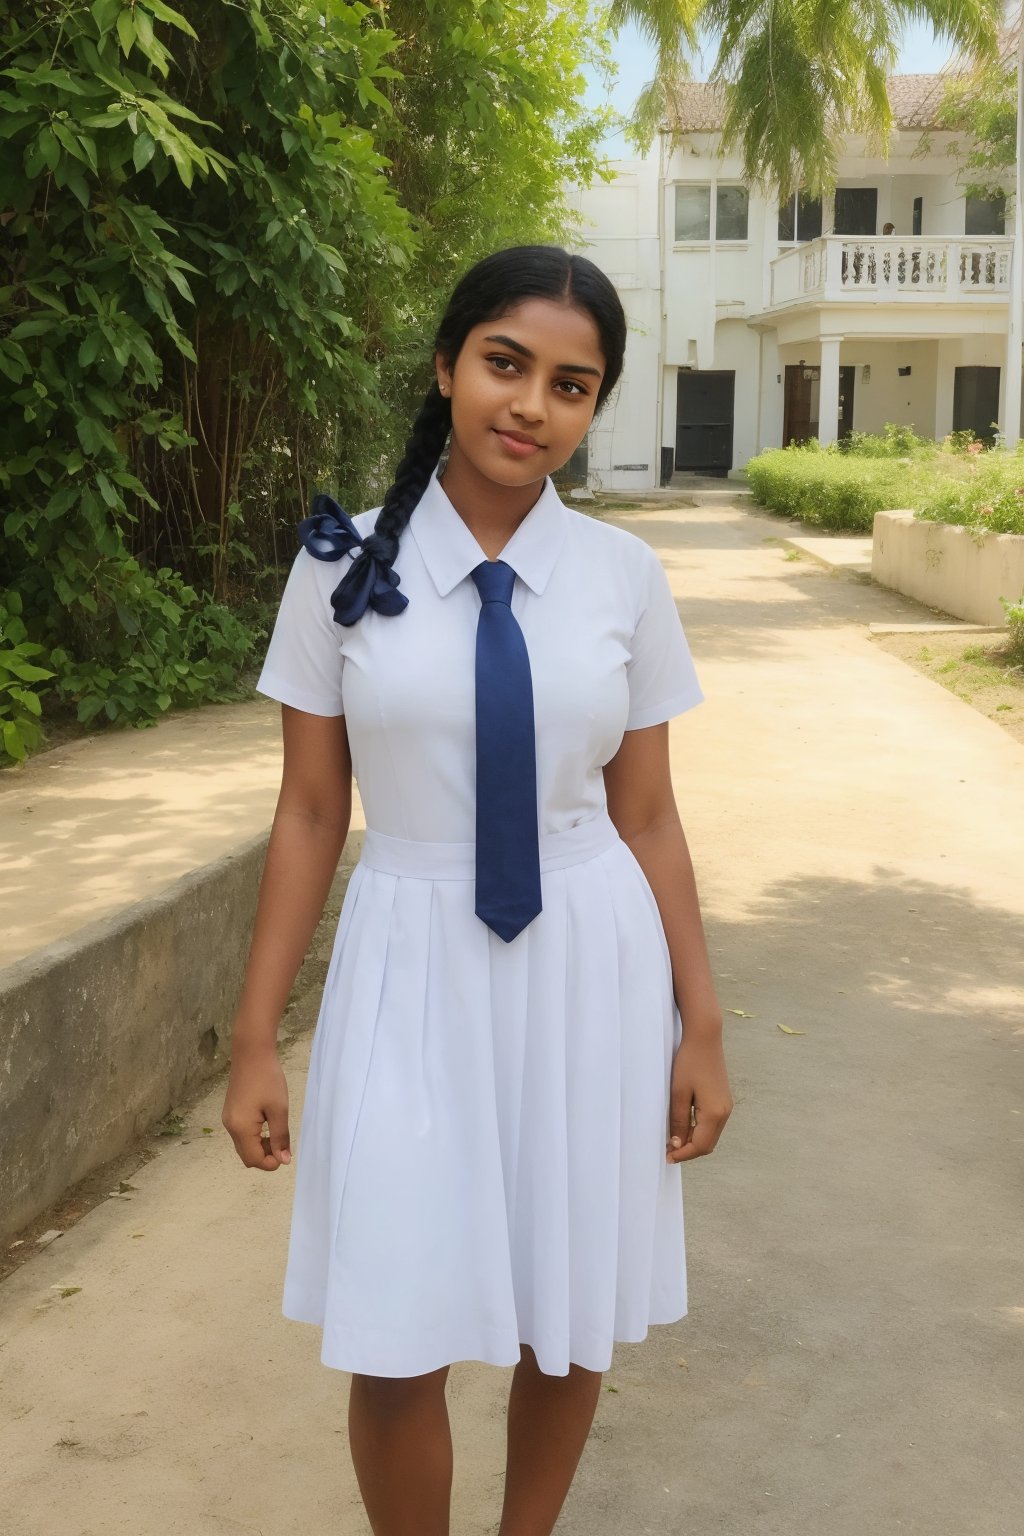 (full body shot:1.5), (Masterpiece:1.1), she is in standing position, 1girl, solo girl, 16 year old girl, ultra realistic face, hyperrealistic, hyperdetailed, perfect beauty, (looking at viewers), one girl around 15 years, ((masterpiece, best quality)), beautiful cute Sri Lankan school girl, very fair skin tone,  [[dress in white very long mid frock with collar, wearing a bra and below hip pleated frock]] [tie with blue and white strips], wearing short socks and white sneakers, 16 years old, She has plaits, black braided long hair, curvy body, small hips, sexy thigh, up skirt, cinematic lighting, glowing, movie filter, moody effect, thick body, beautiful Indian face, tanned skin, dark skin, oily sweaty skin, Masterpiece, boobs , school girl  uniform, Sri Lankan, white very mid long frock,